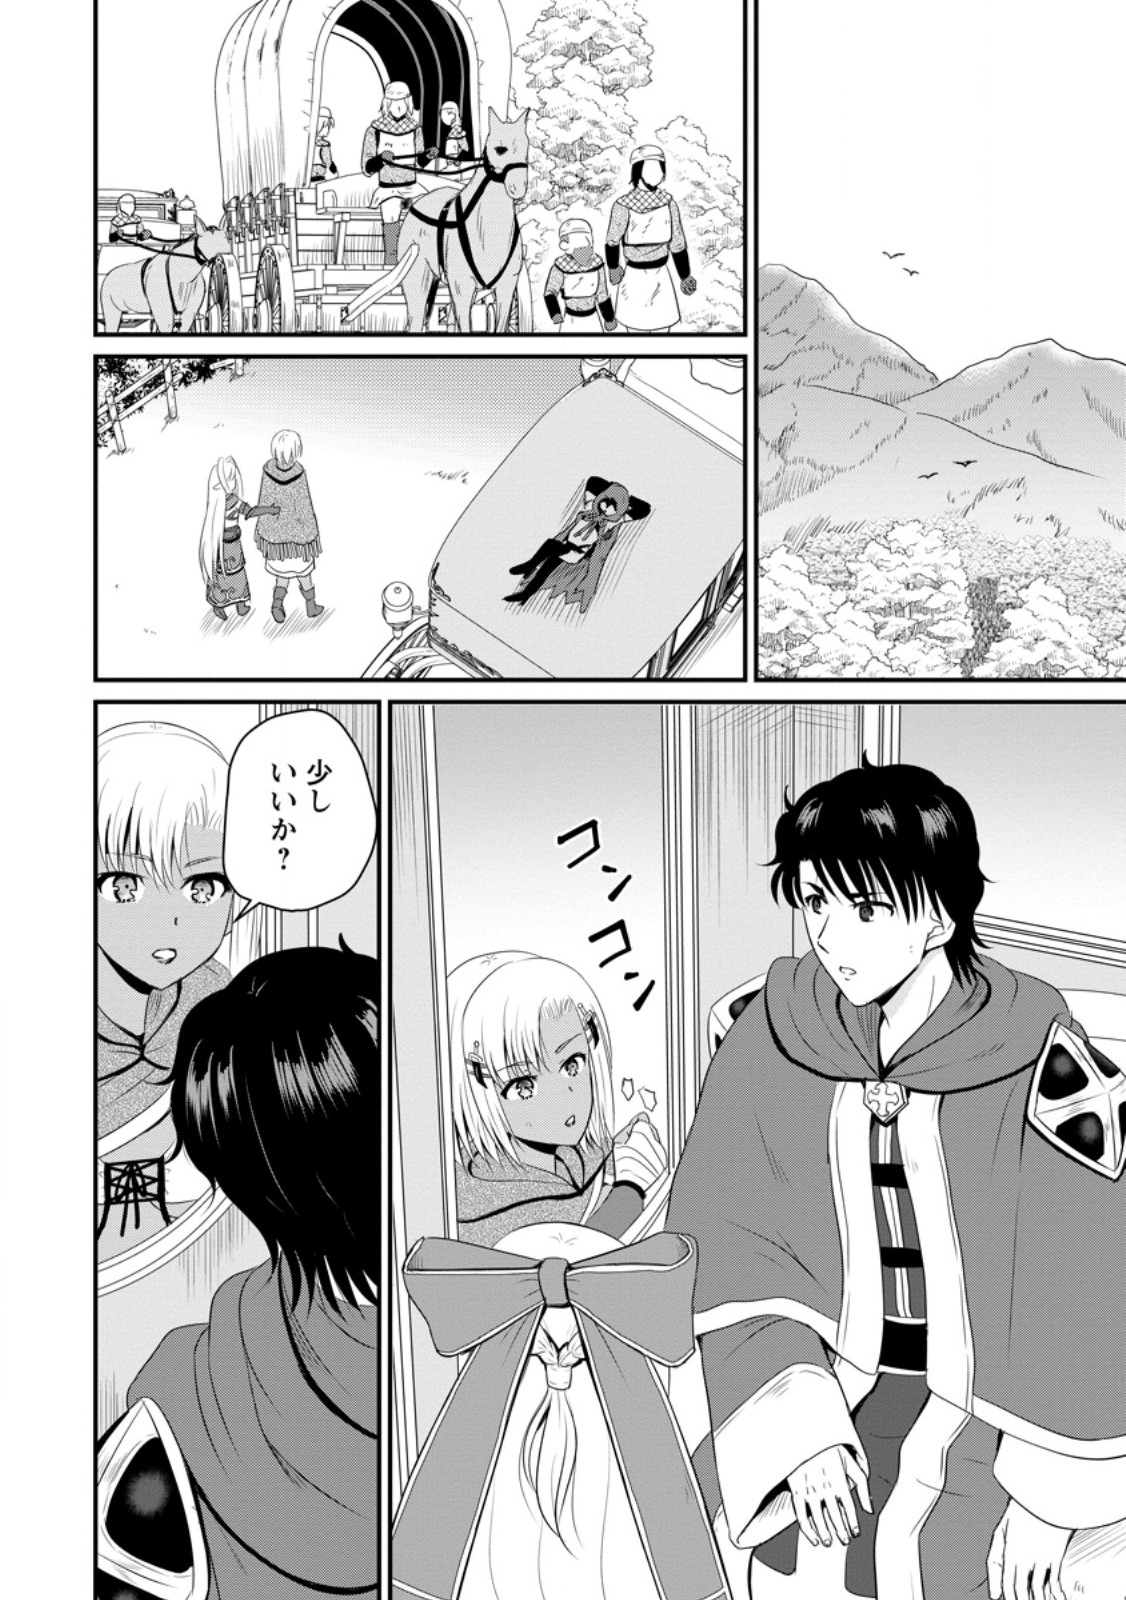 The Frontier Life of The Low-Class Ossan Healer And The Lovery Girl - Chapter 49.1 - Page 2